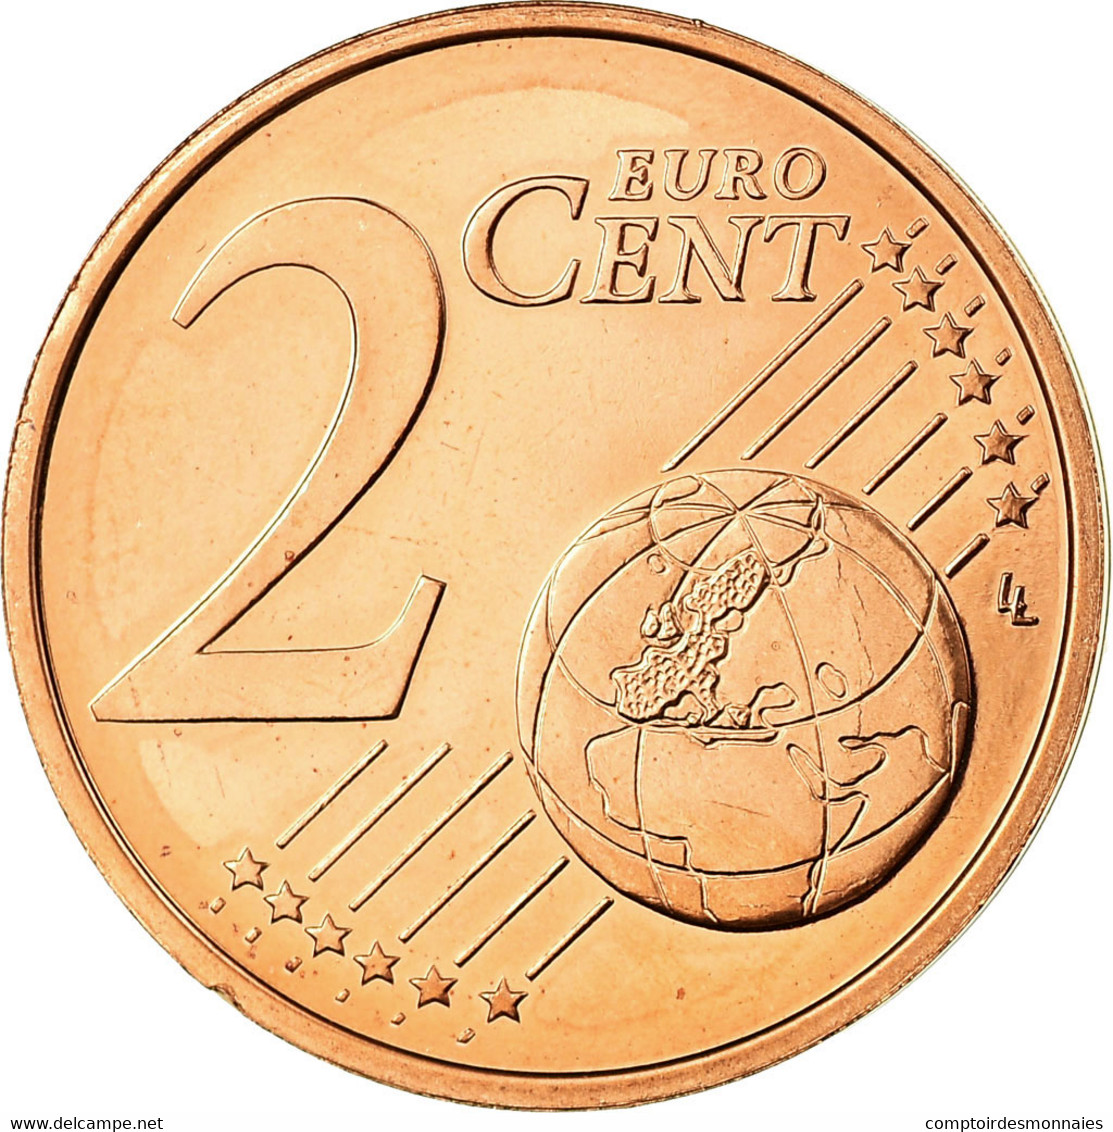 Chypre, 2 Euro Cent, 2008, FDC, Copper Plated Steel, KM:79 - Zypern